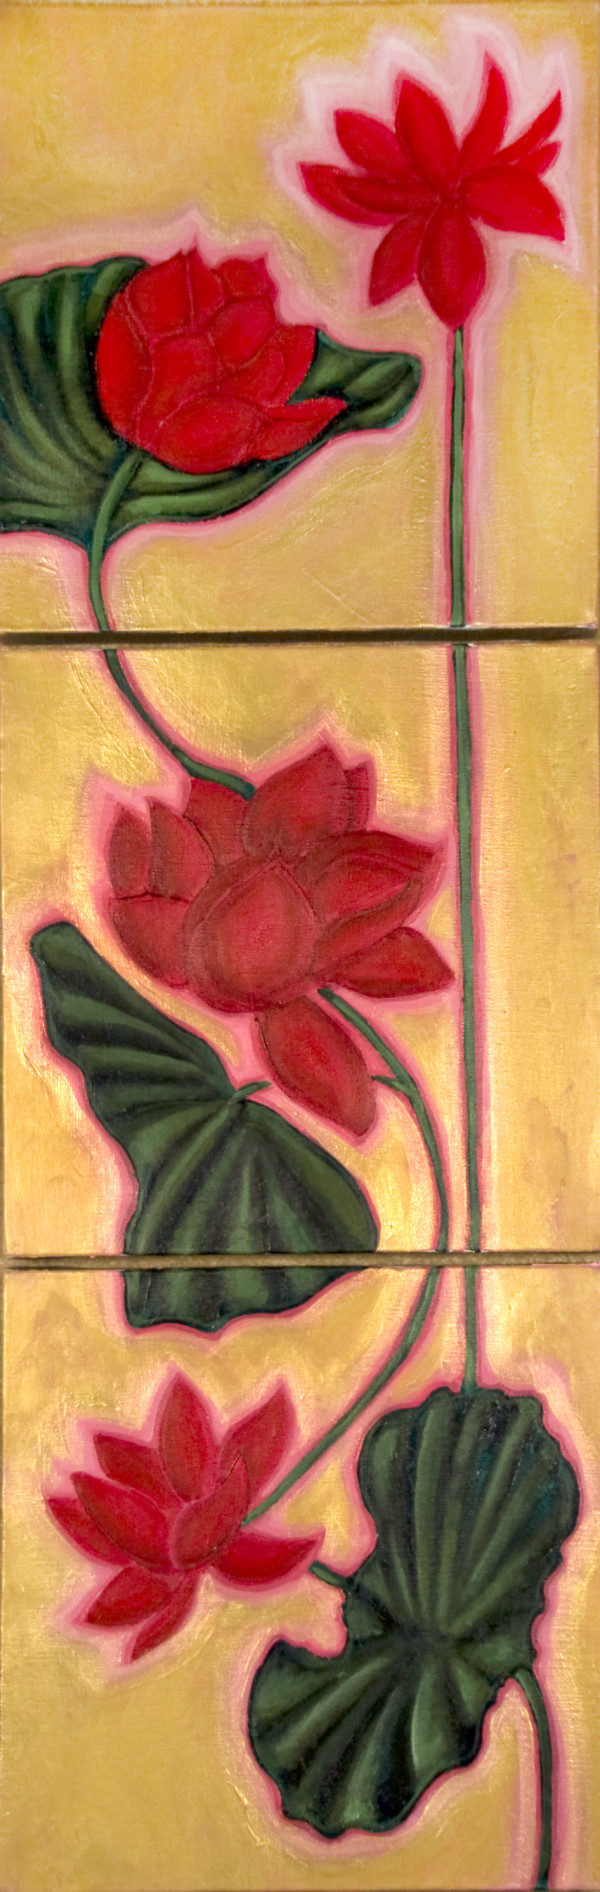 Red Lotus 2012 (tryptich)